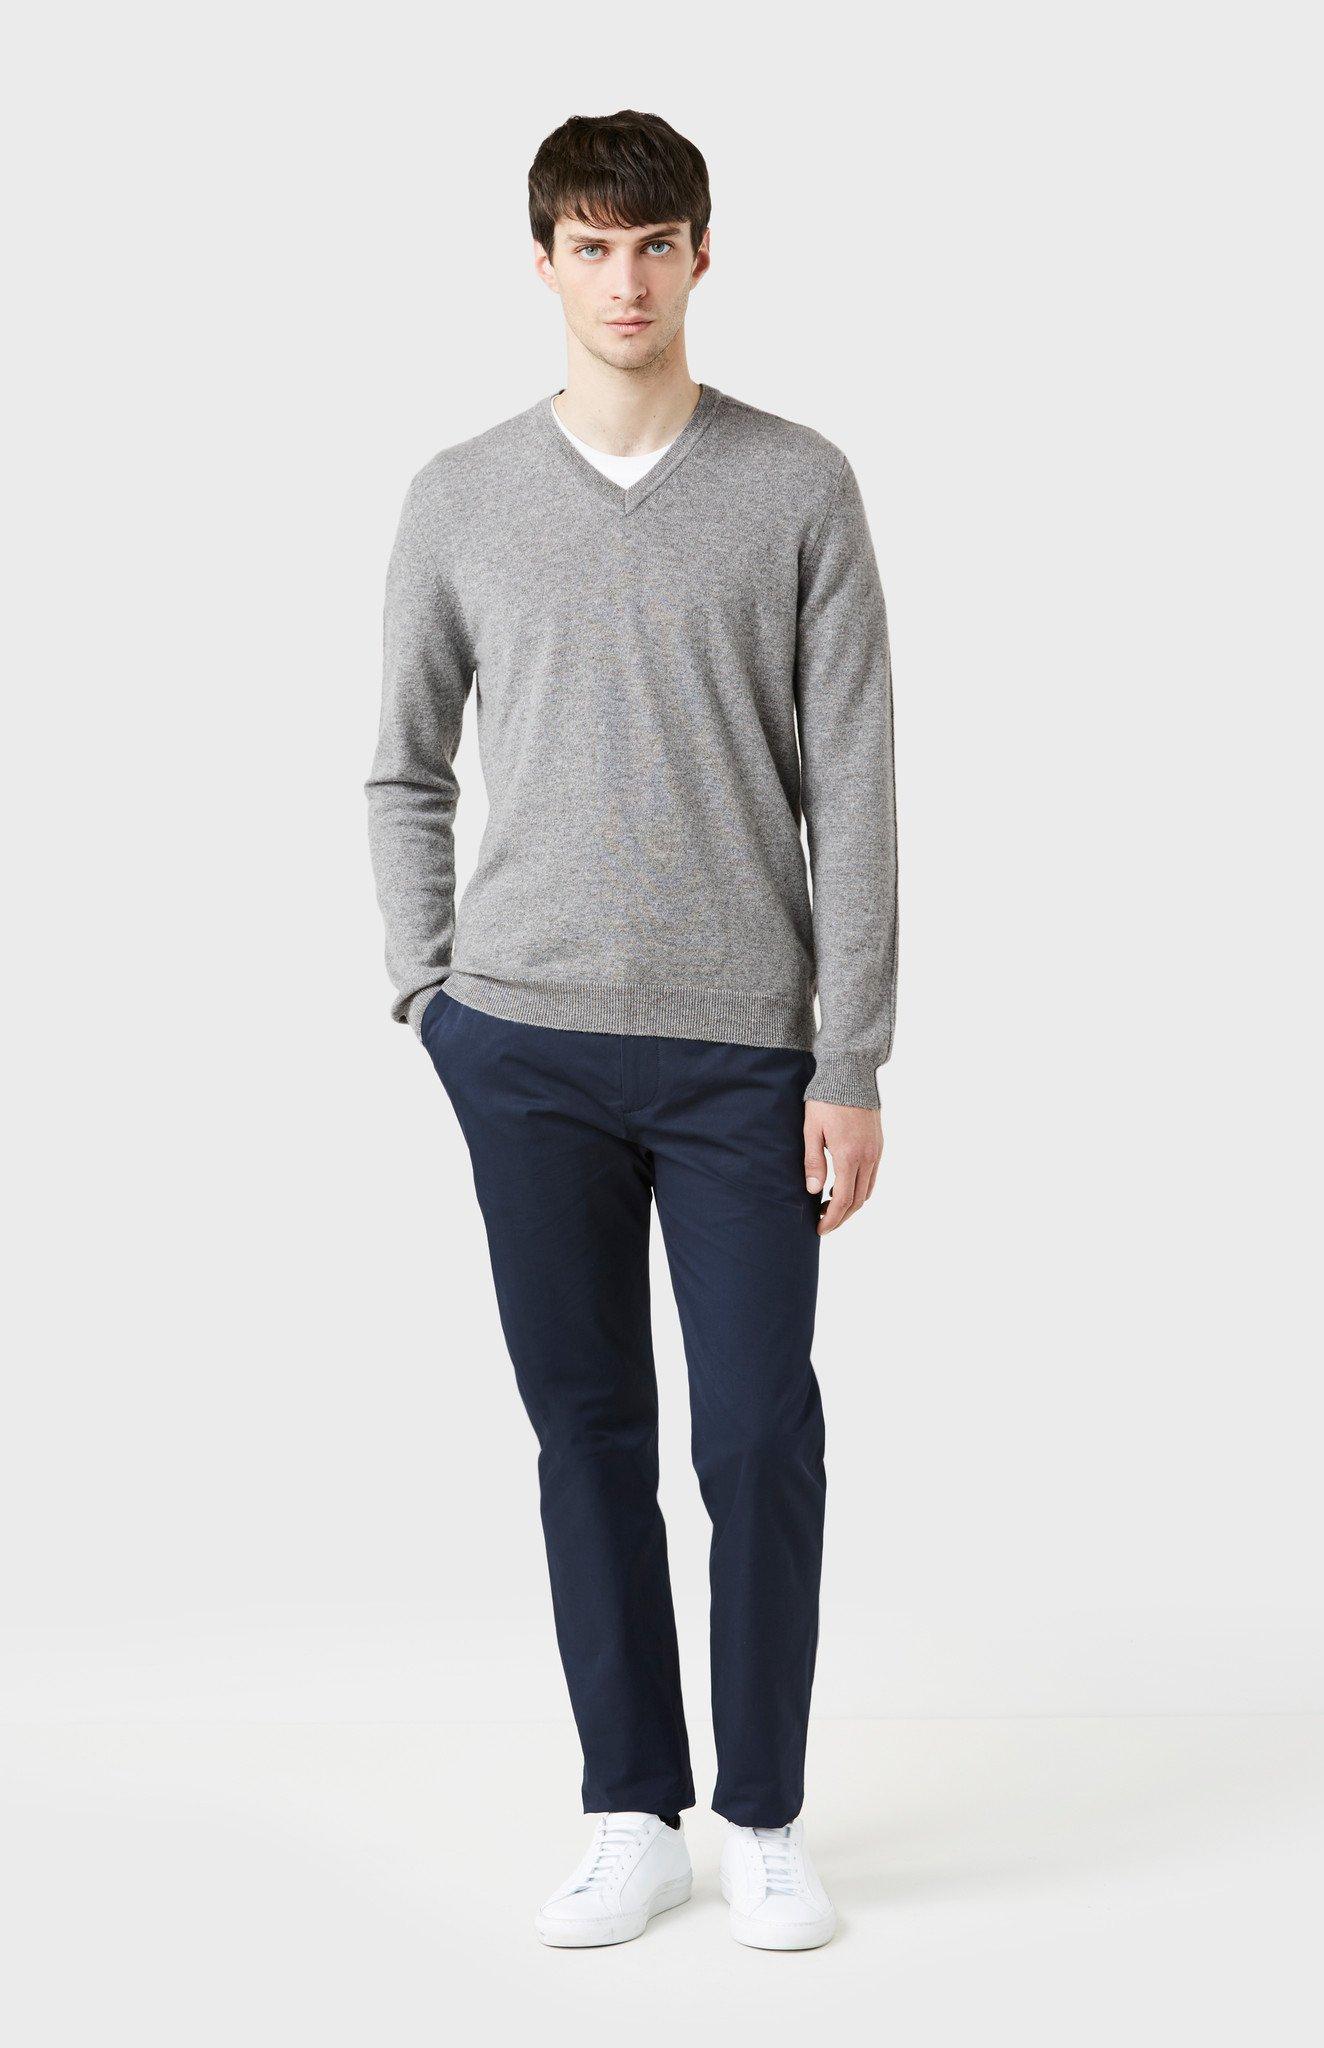 Pringle of Scotland Classic Cashmere Jumper In Grey in Grey for Men - Lyst